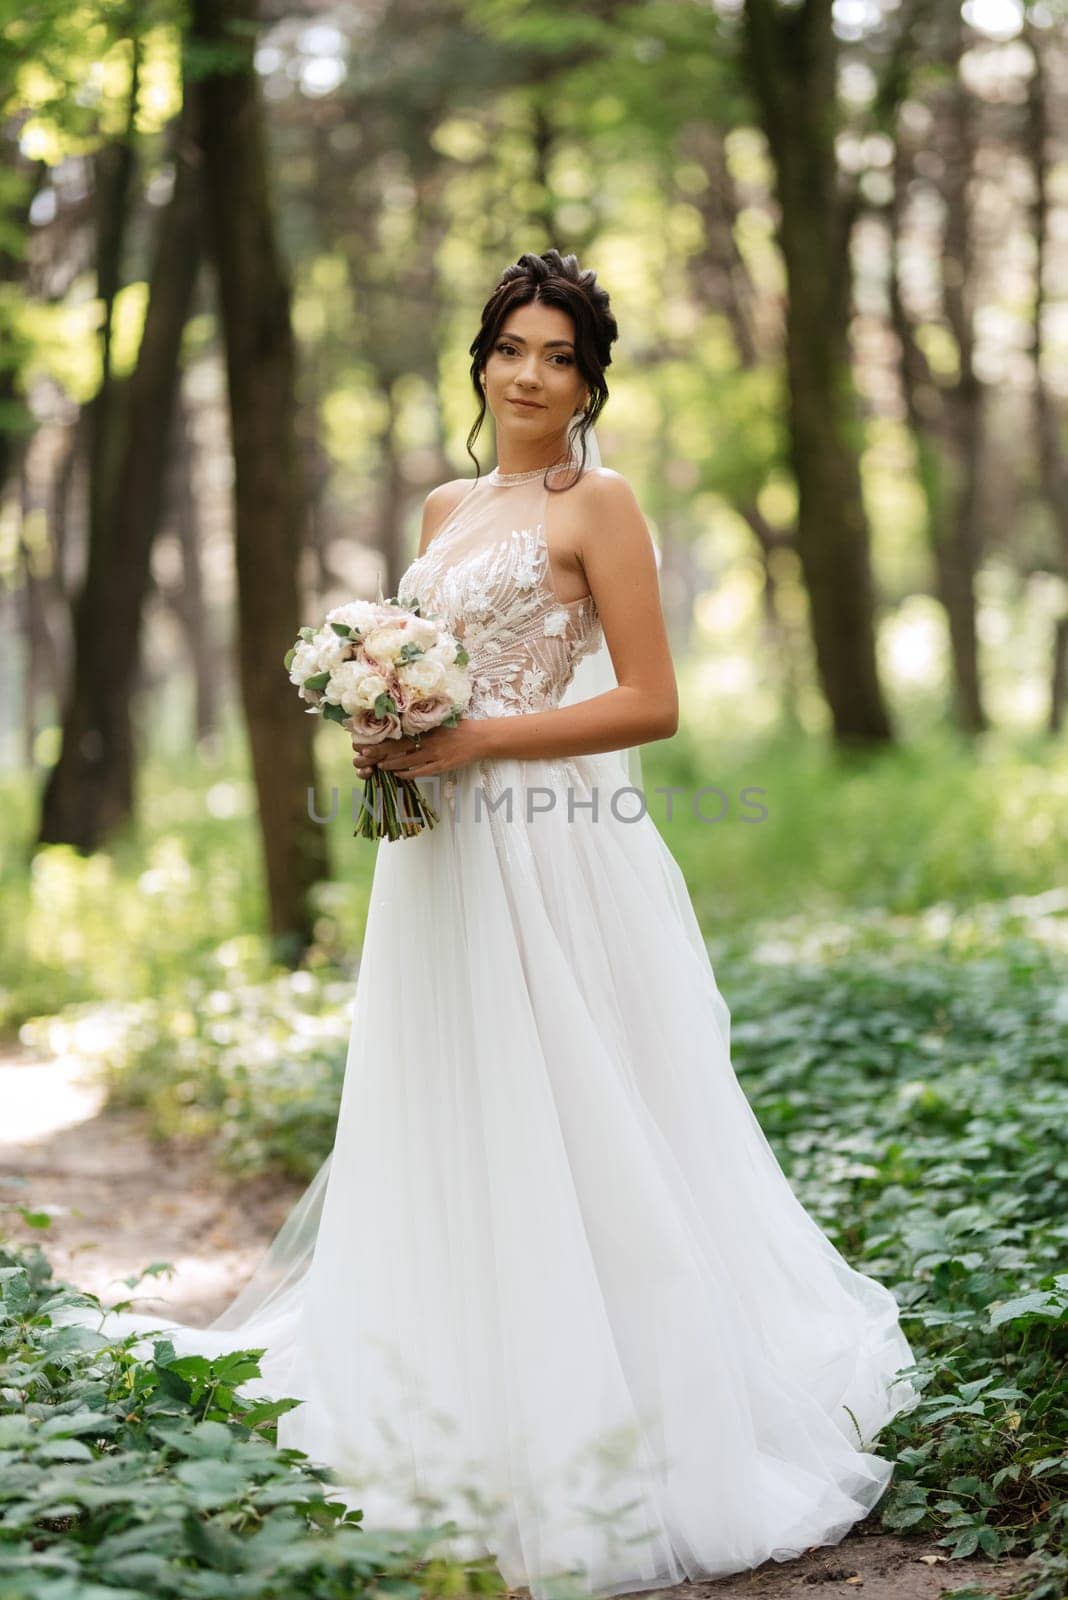 portrait of an elegant bride girl on a path in a deciduous forest